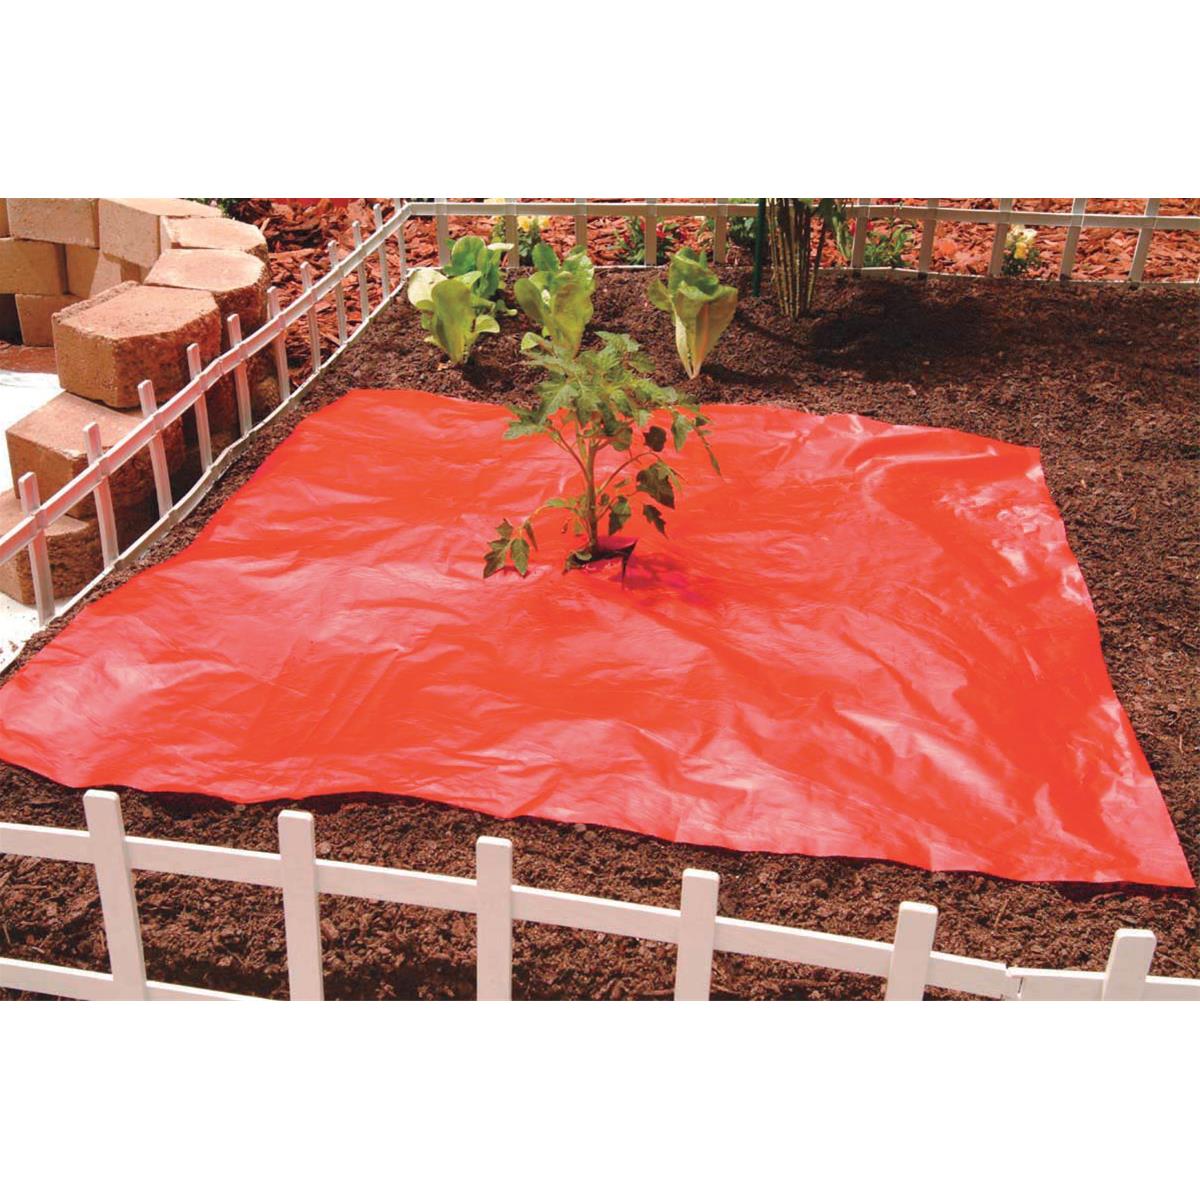 Perforated Red Mulch Film